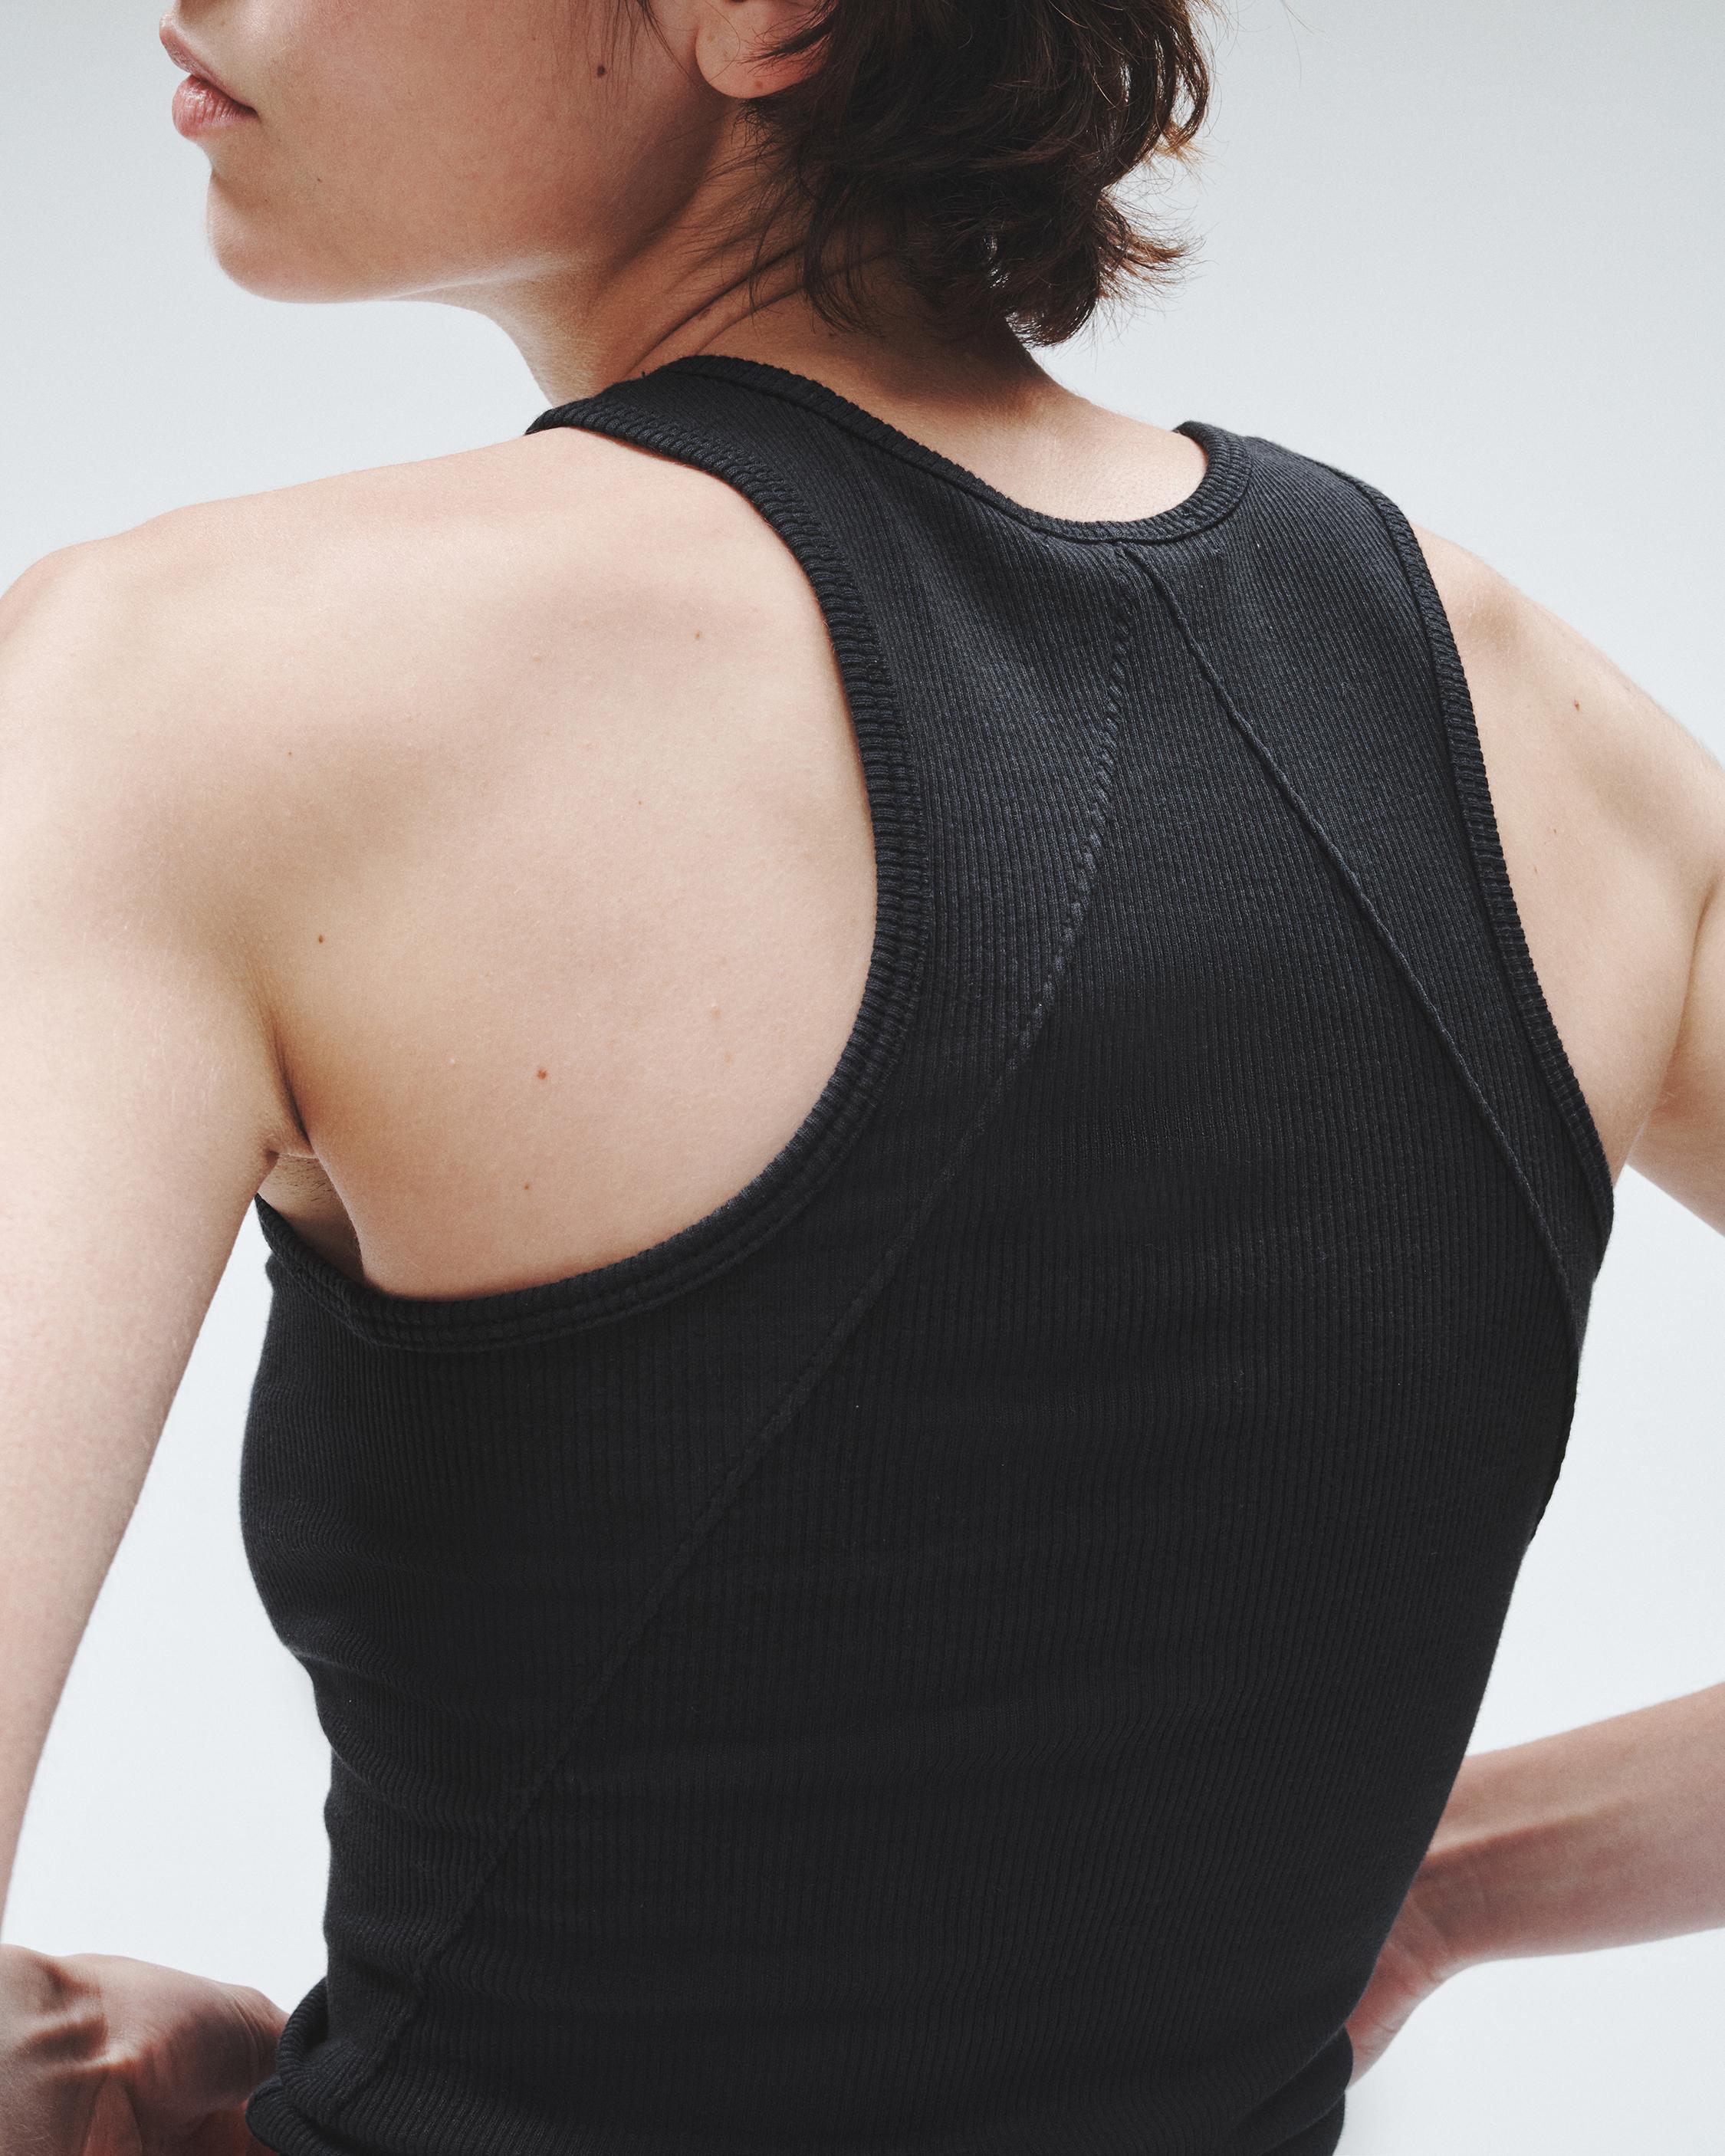 The perfect ribbed tank top is a closet essential. Available in